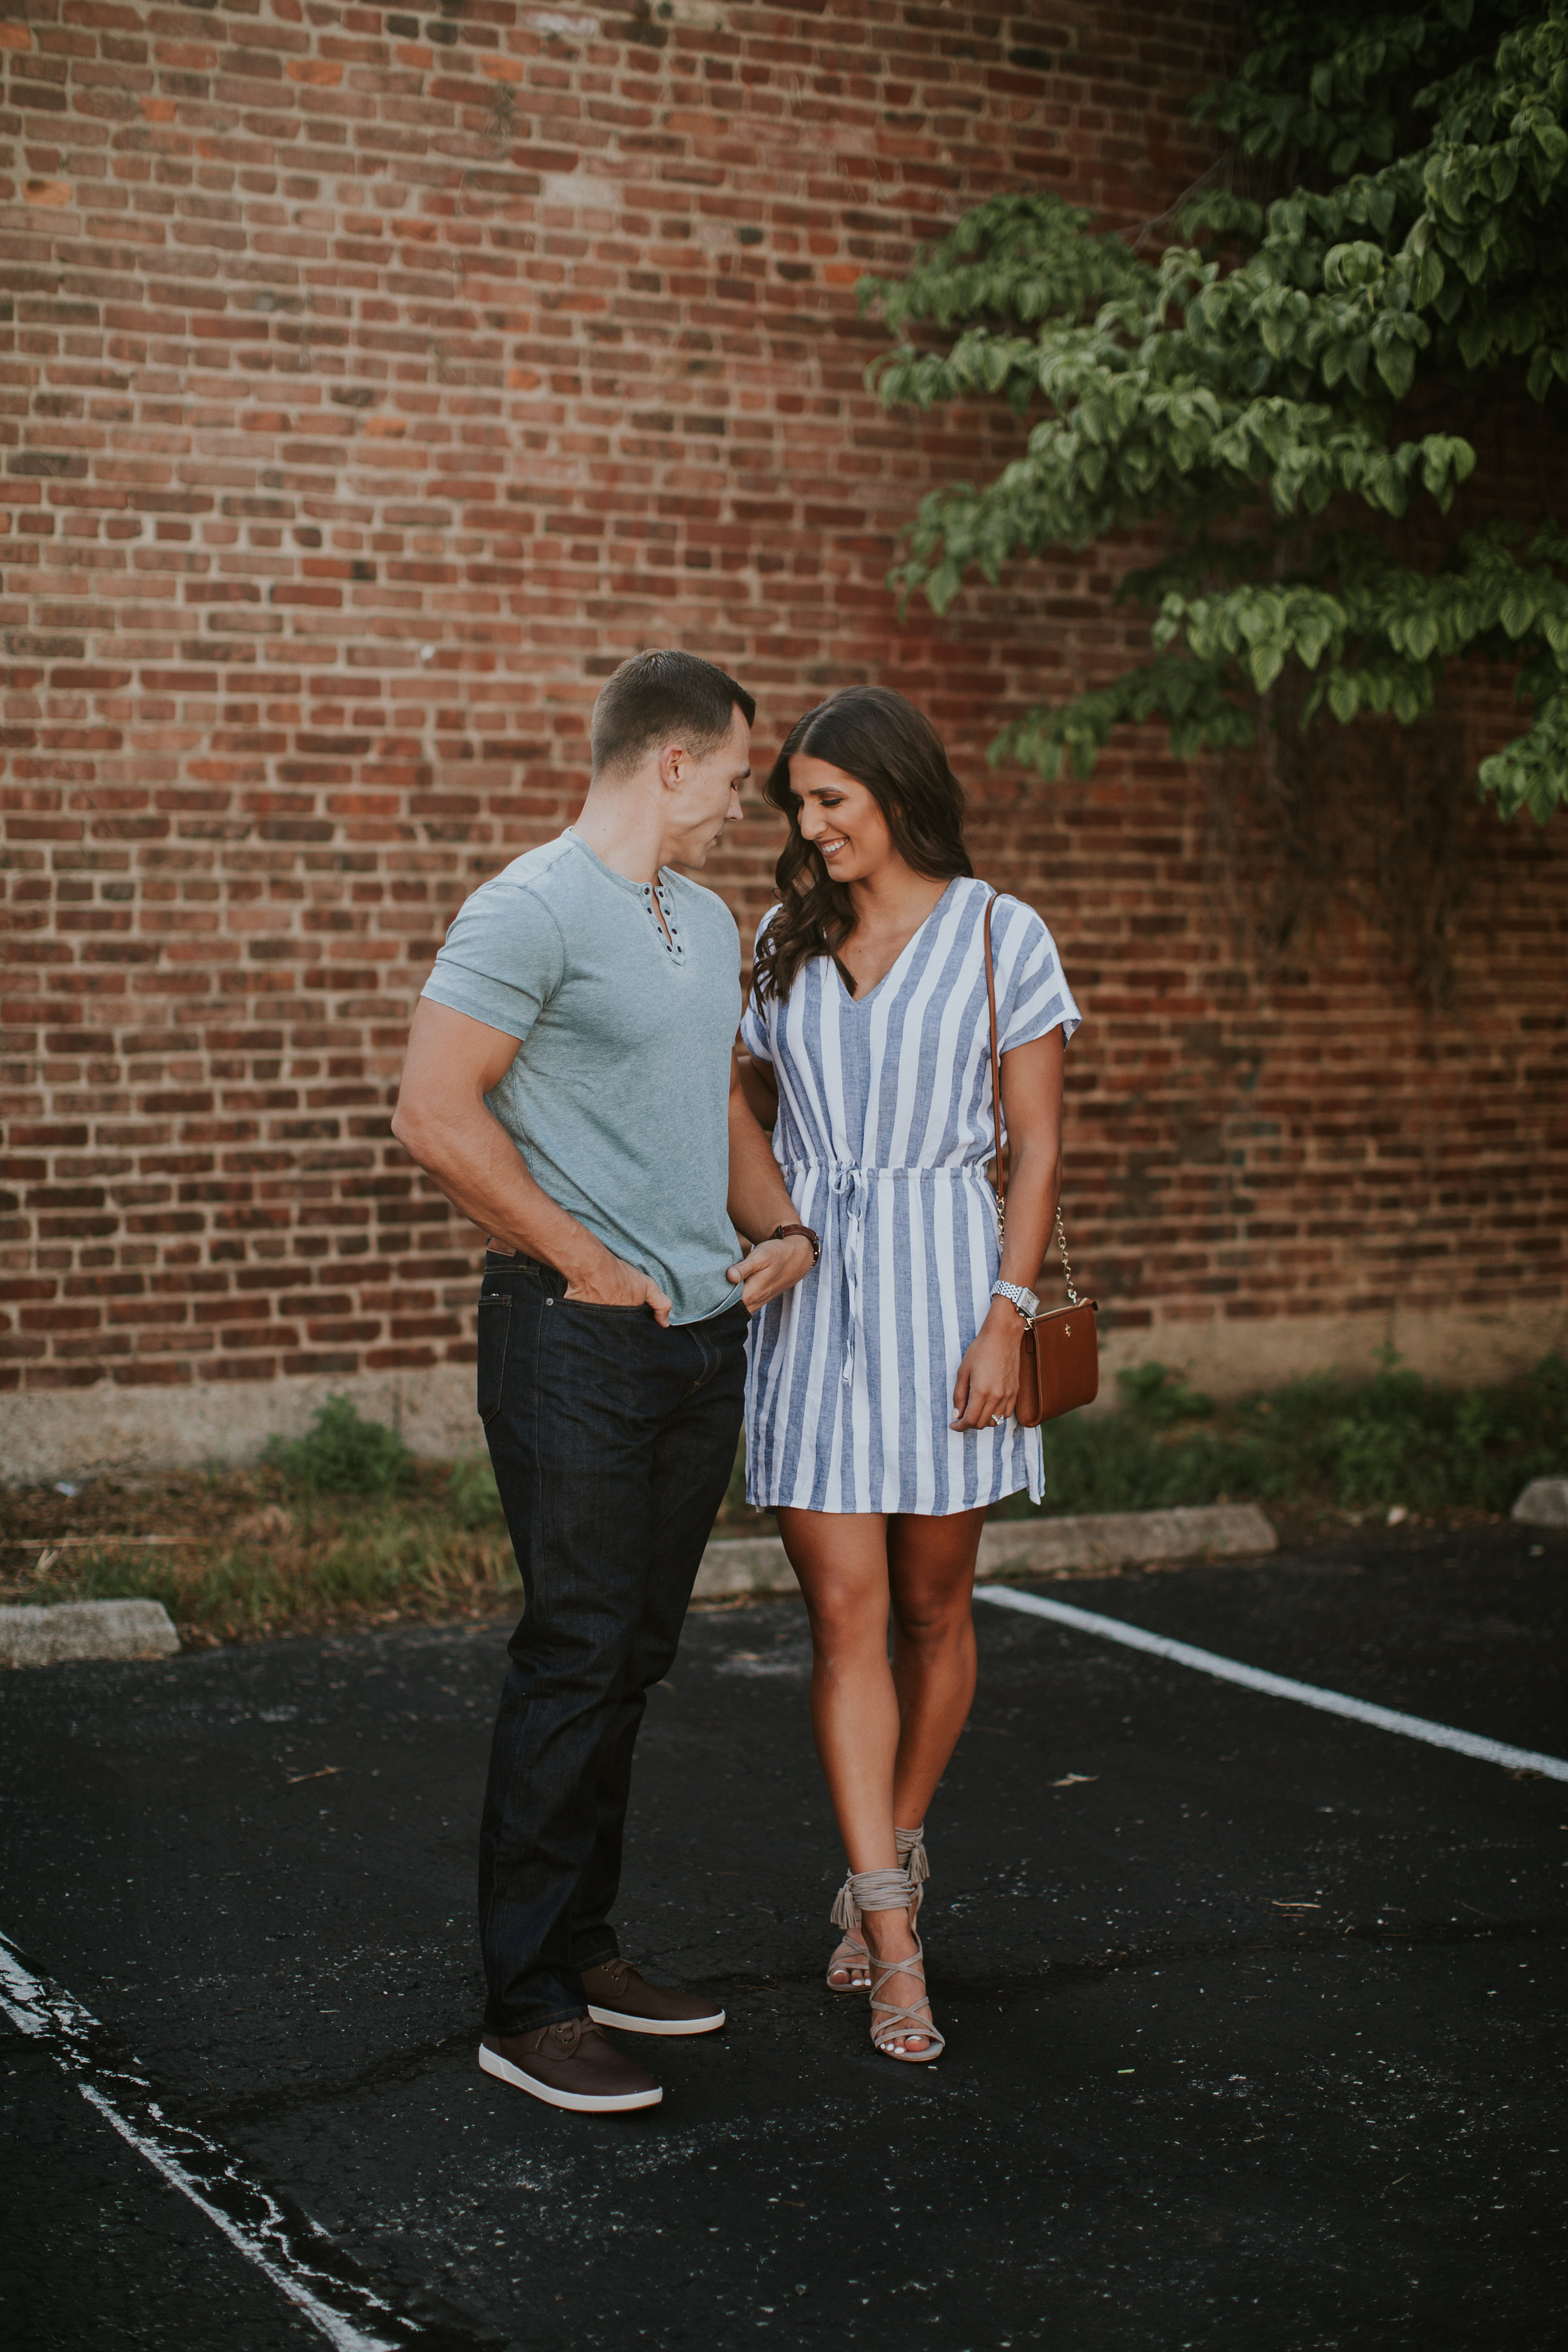 grace wainwright wedding, a southern drawl wedding, grace white wedding, grace and jordan white, men's nordstrom anniversary sale finds, couples shoot, couples session, a southern drawl engagement, jordan white louisville, grace white louisville, grace wainwright louisville, nordstrom anniversary sale men, 2018 nordstrom anniversary sale public access, shop nordstrom, nordstrom shoes, nordstrom dresses, nordstrom handbag sale, nordstrom anniversary sale dates, Nordstrom Anniversary Sale 2018, nordstrom anniversary sale picks, nordstrom anniversary sale catalog, sale picks for nordstrom anniversary sale 2018, information on nordstrom anniversary sale, nordstrom credit card, nordstrom debit card, nordstrom rewards, nordstrom sale, nordstrom anniversary sale finds, nsale finds, nsale picks, nike on sale, cute fall outfit, fall style, fall inspo, fall sale // grace wainwright a southern drawl  